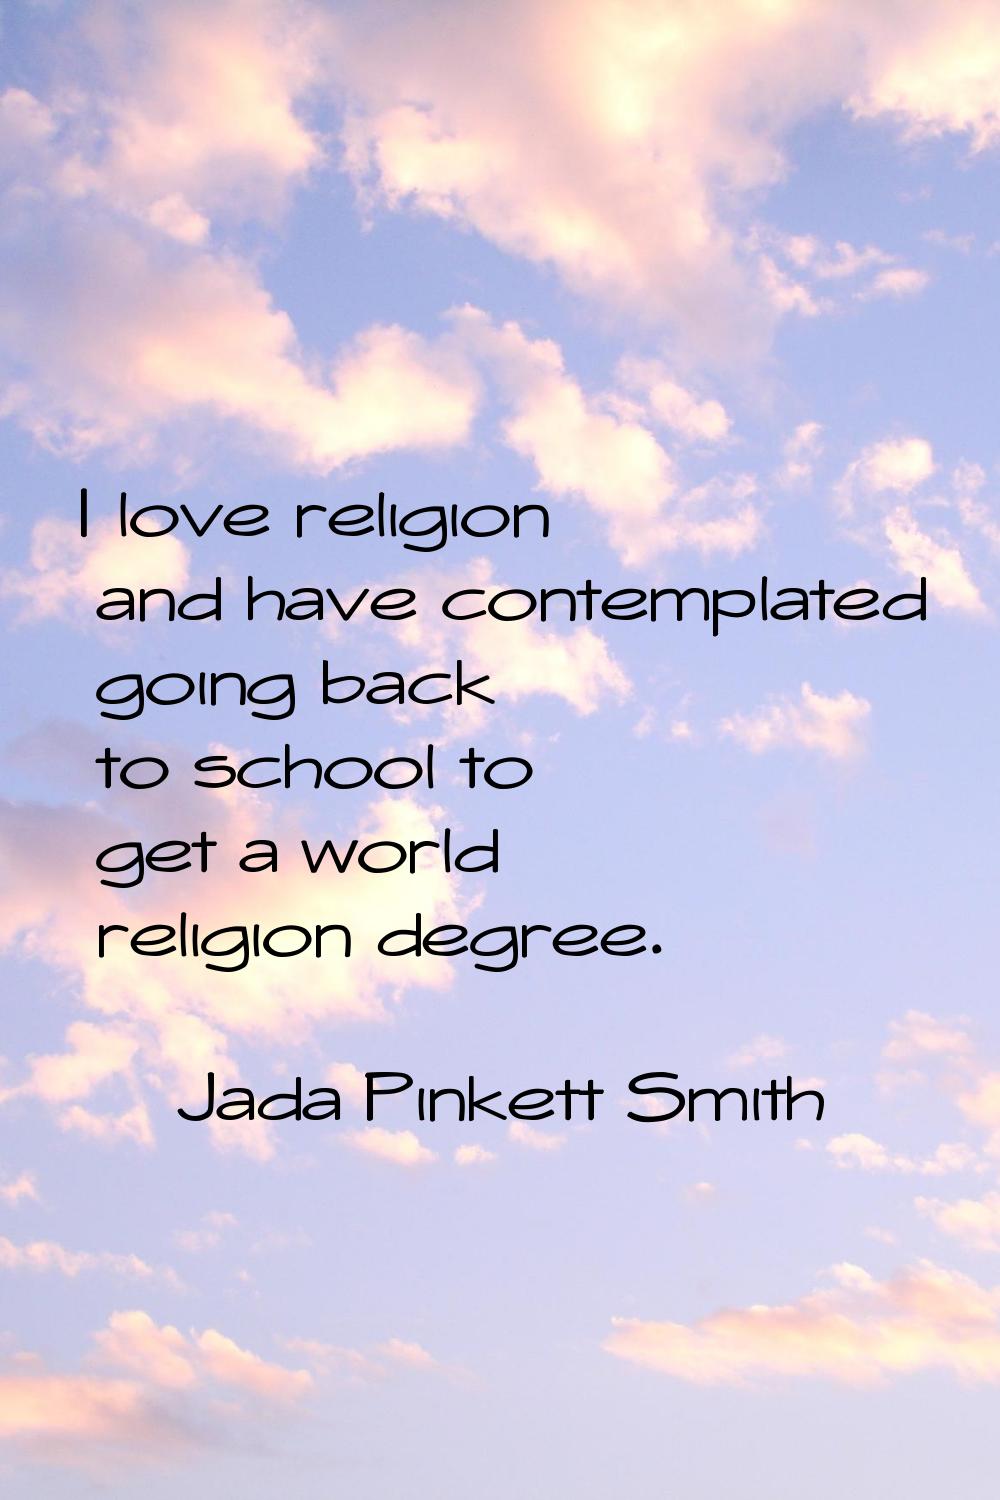 I love religion and have contemplated going back to school to get a world religion degree.